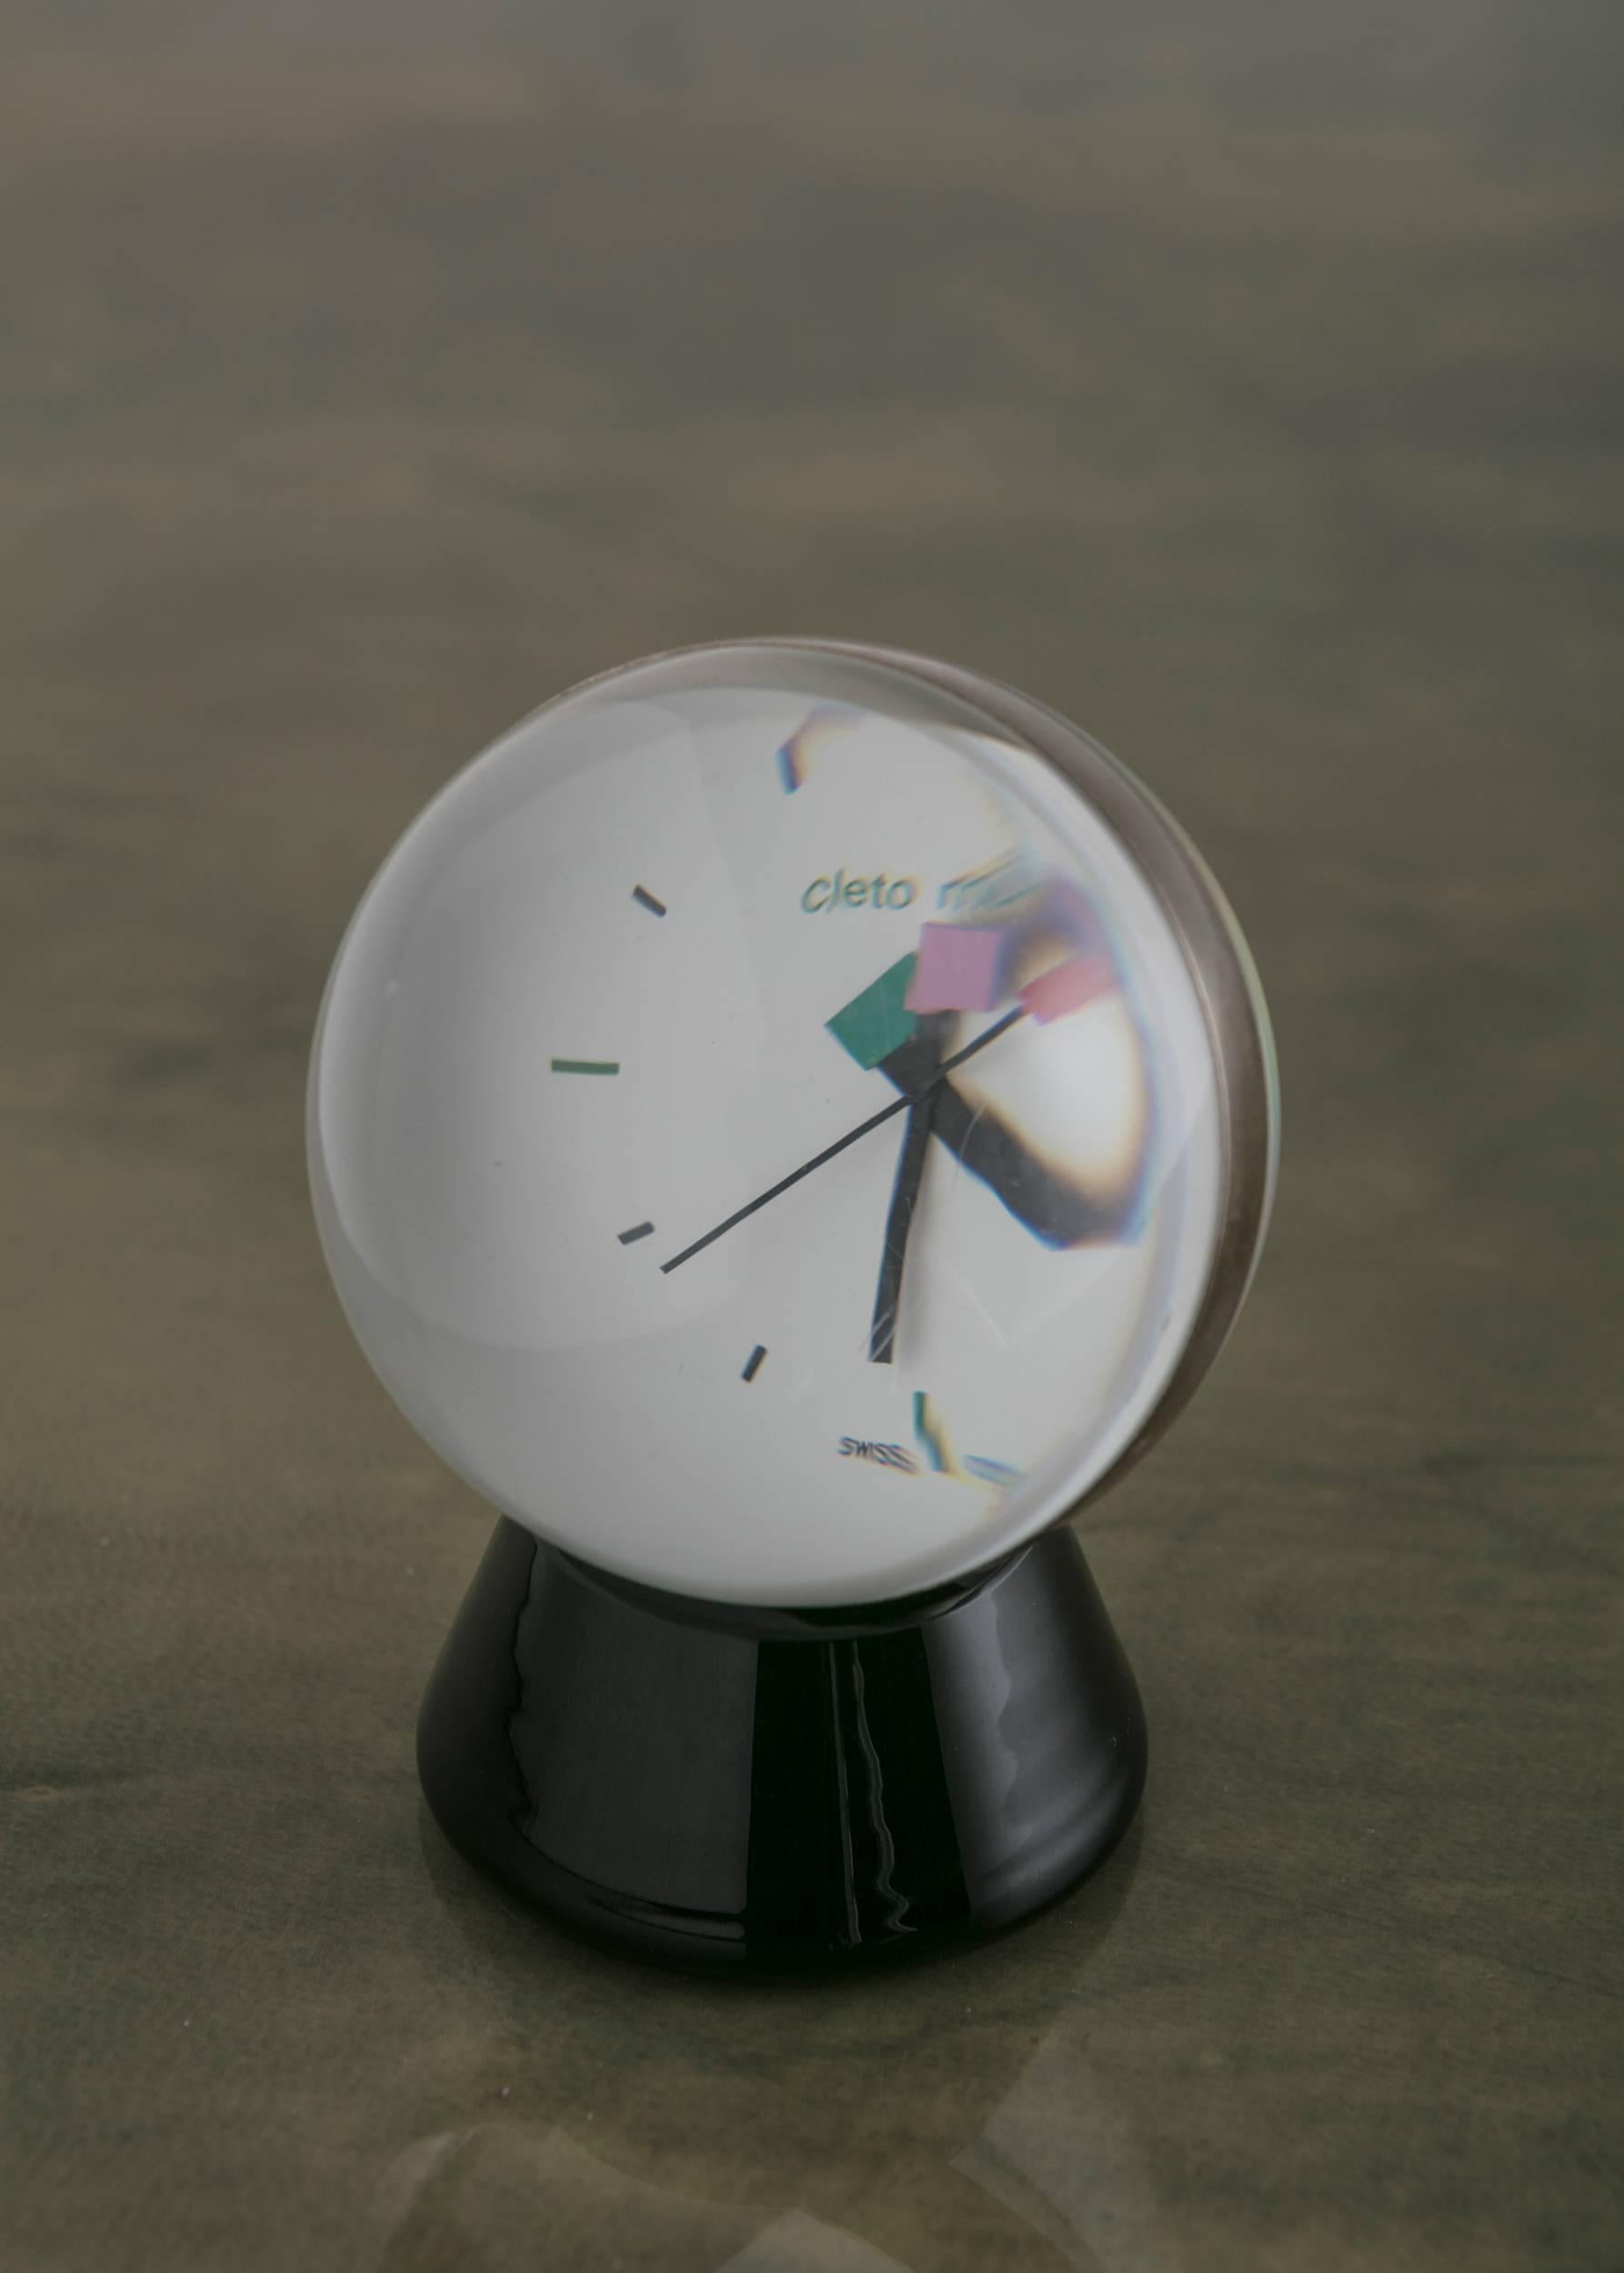 Tiny glass table clock by Cleto Munari.
Heavy transparent sphere with silver stripe lays on a black glass plinth.